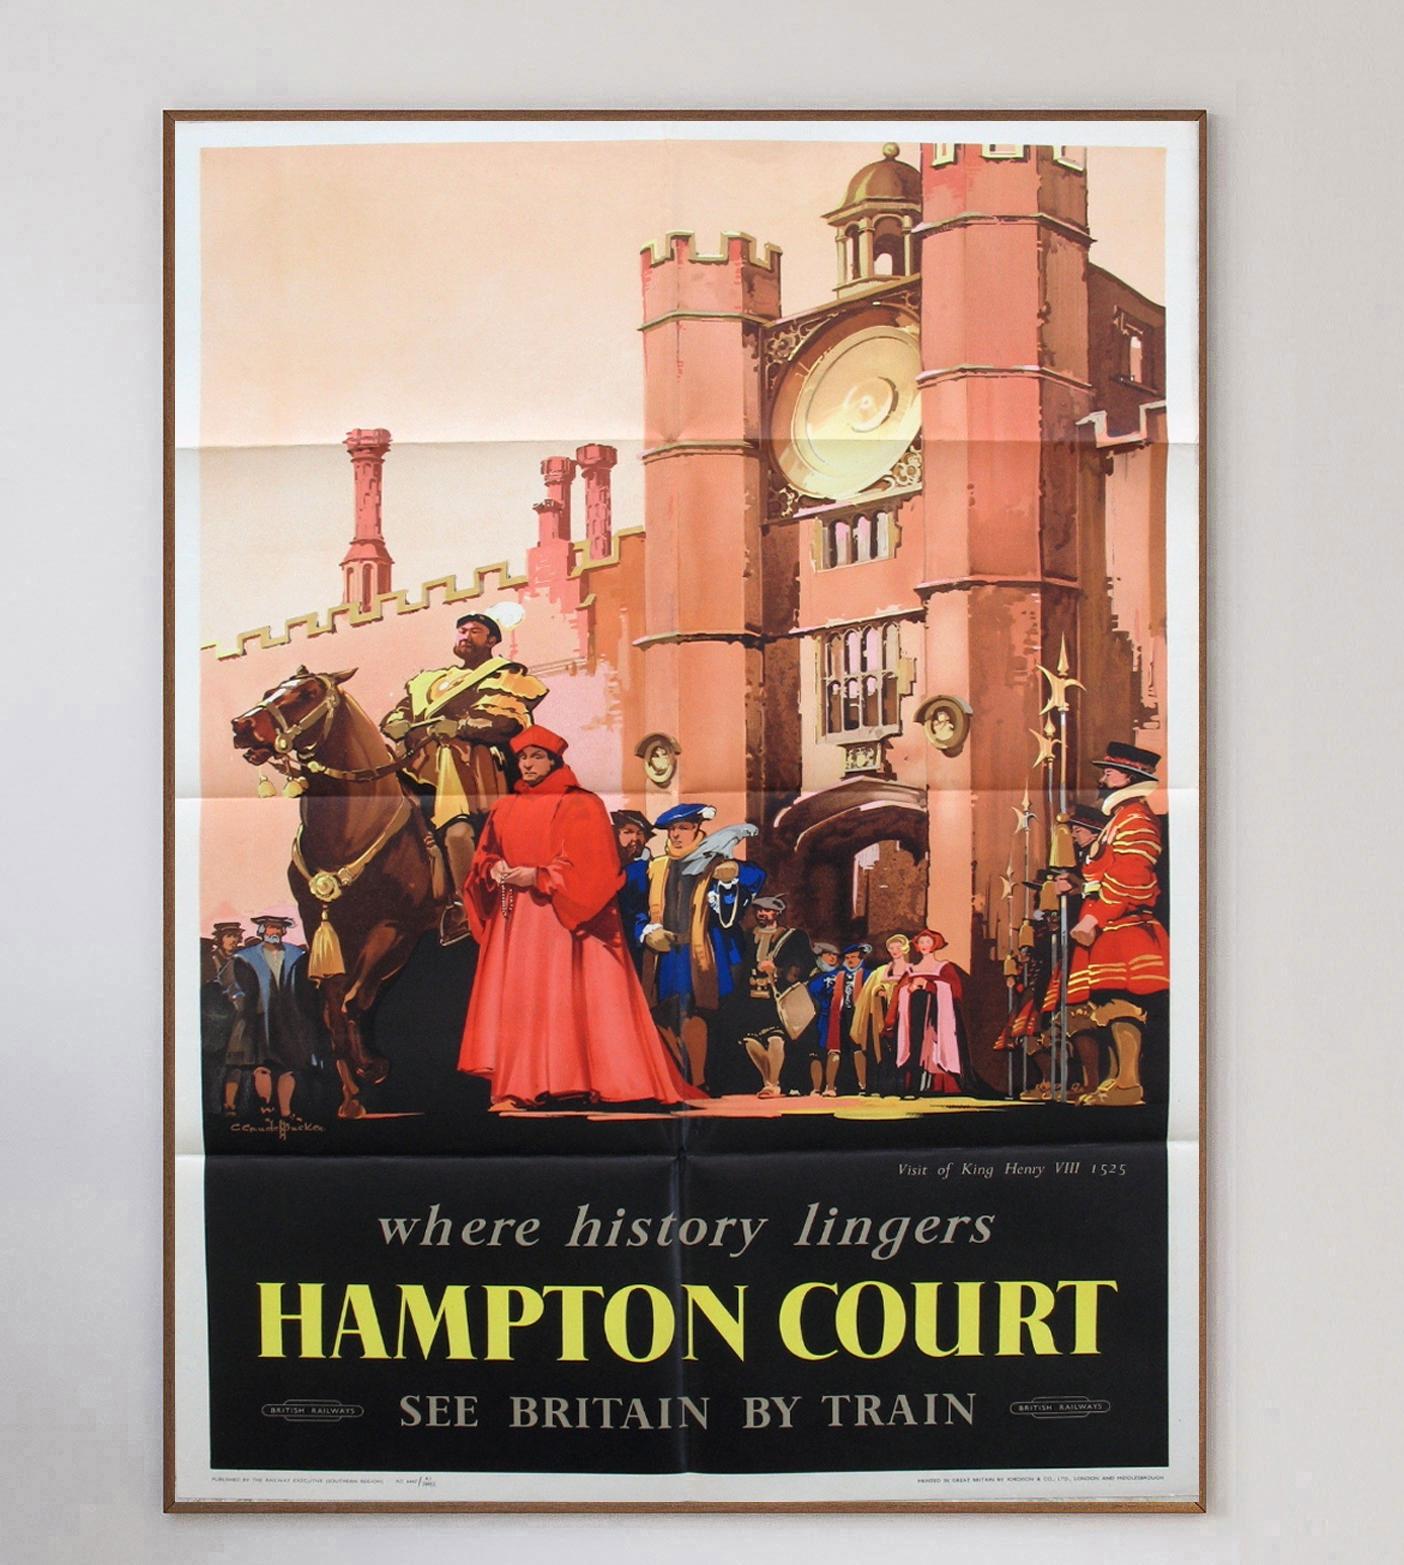 Created in 1952 by British Railways, this beautiful poster advertises routes to Hampton Court in Richmond upon Thames, London, England. Artist Claude Henry Buckle (1905-73) created a small series of these posters to promote the historical